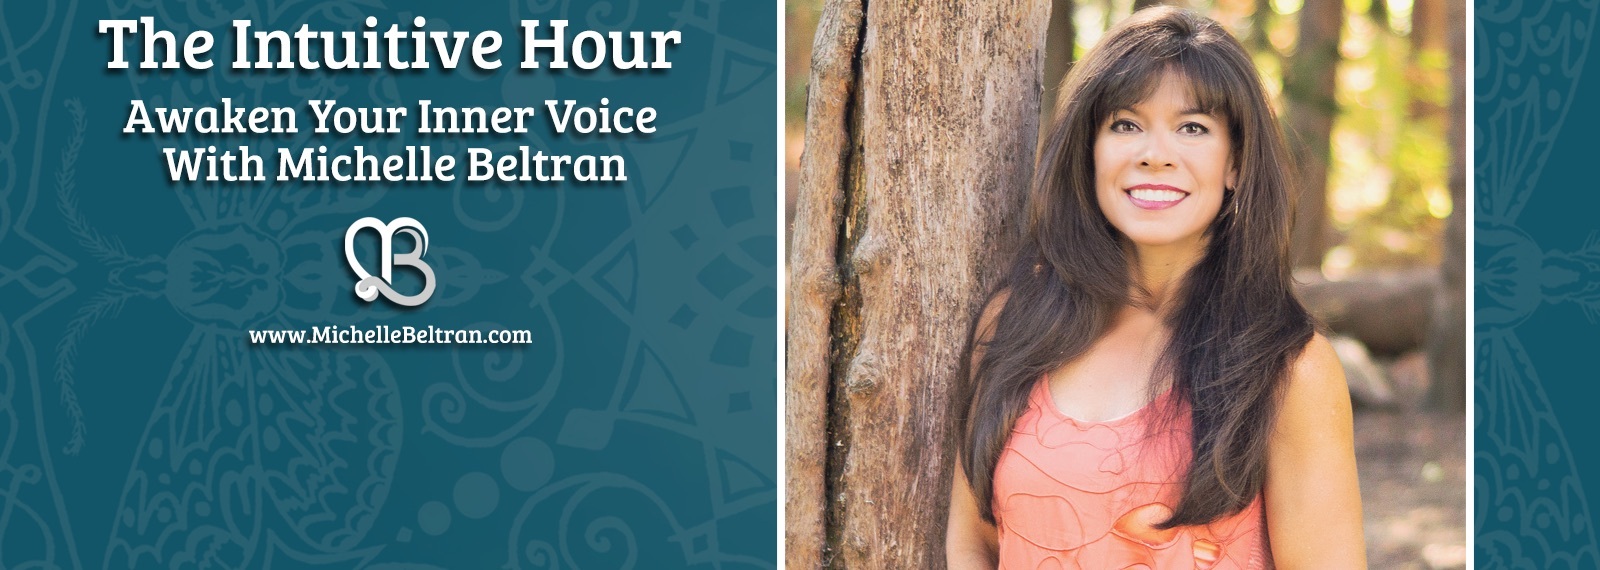 The Intuitive Hour: Awaken Your Inner Voice